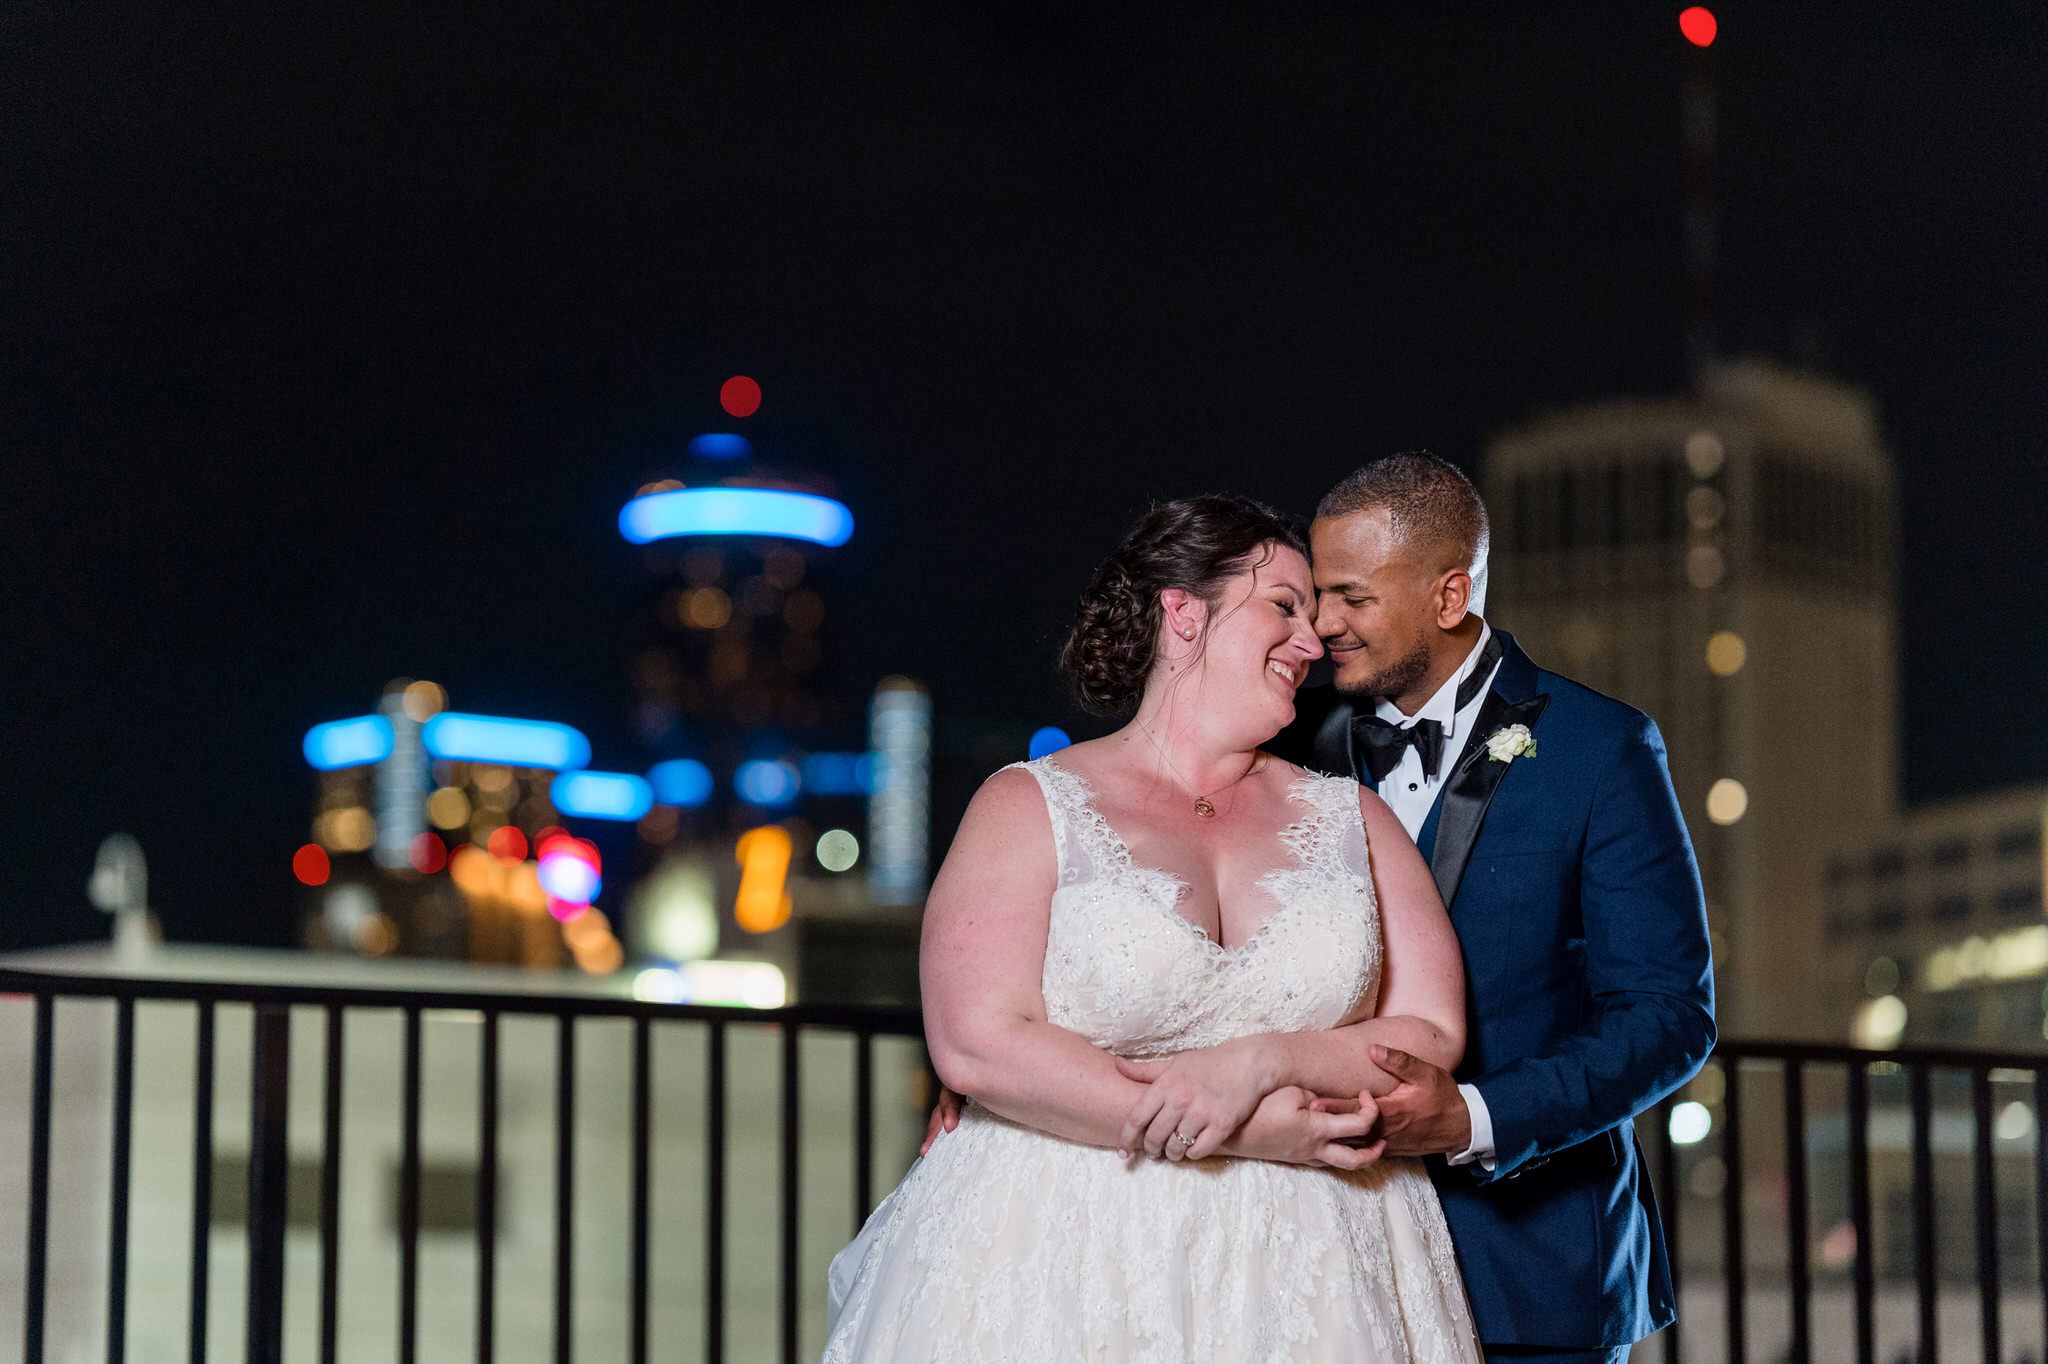 A nighttime photo of bride and groom snuggling up, nose to nose with the GM building in the background